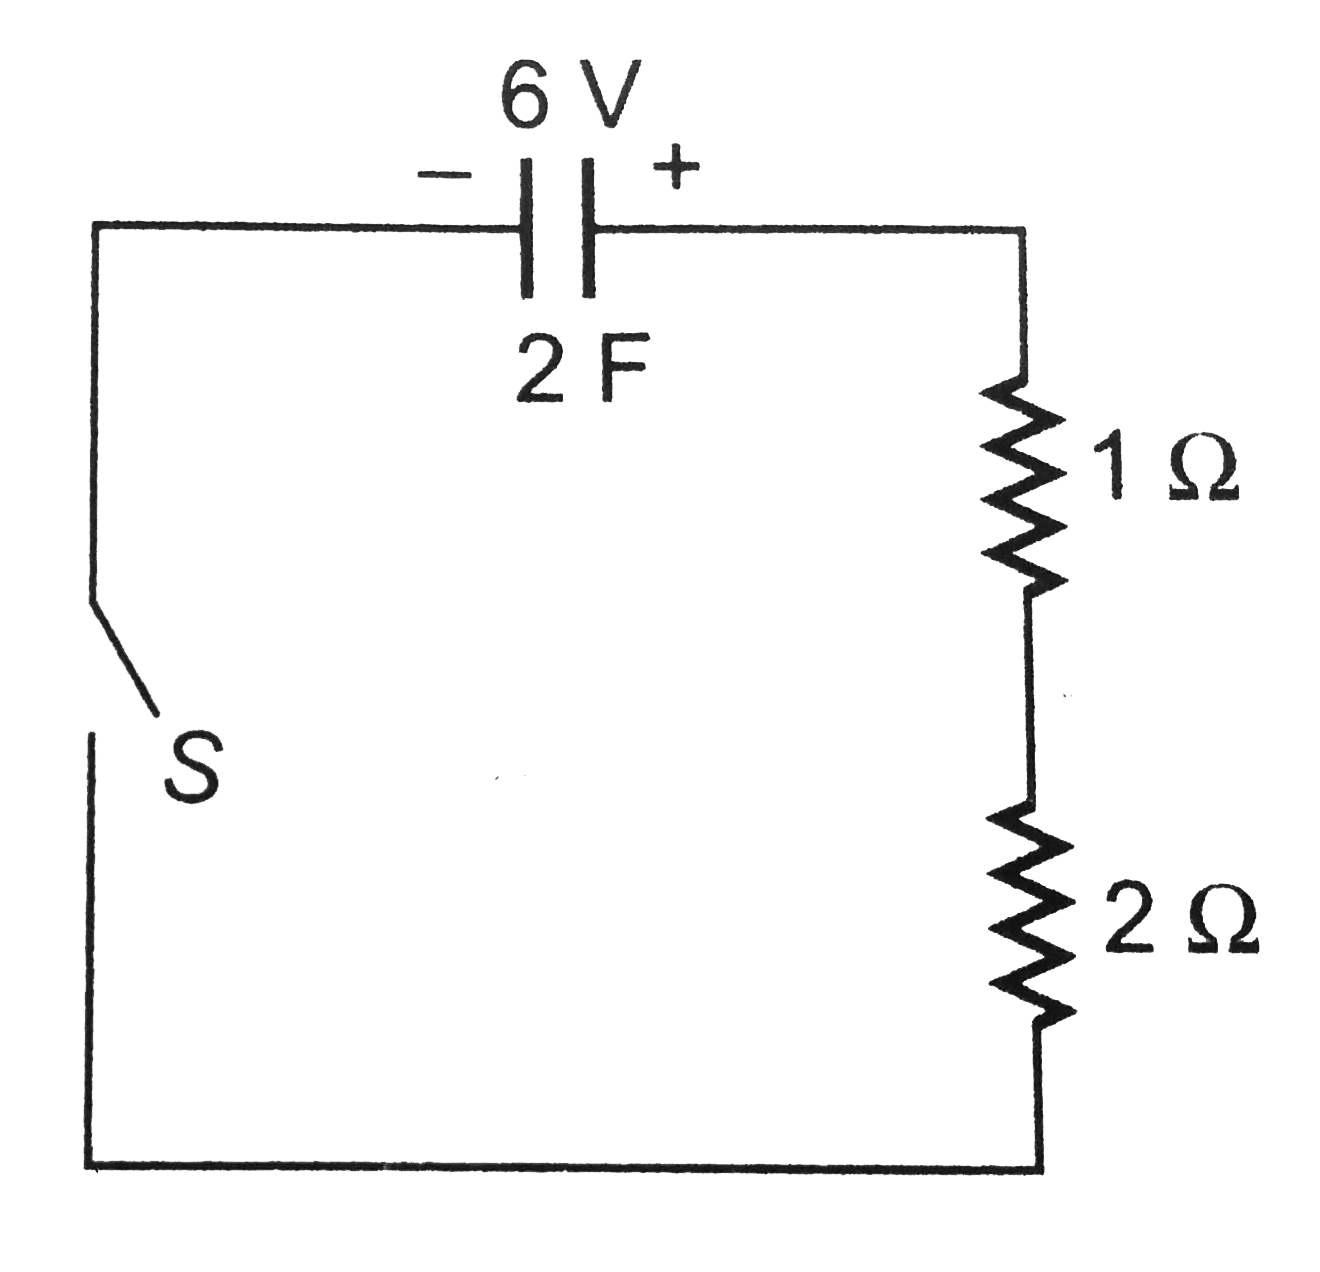 A capacitor of 2F (practically not possible to have a capacity of 2F) is charged by a battery of 6v. The battery is removed and circuit is made as shown. Switch is closed at time t=0 . Choose the correct options.